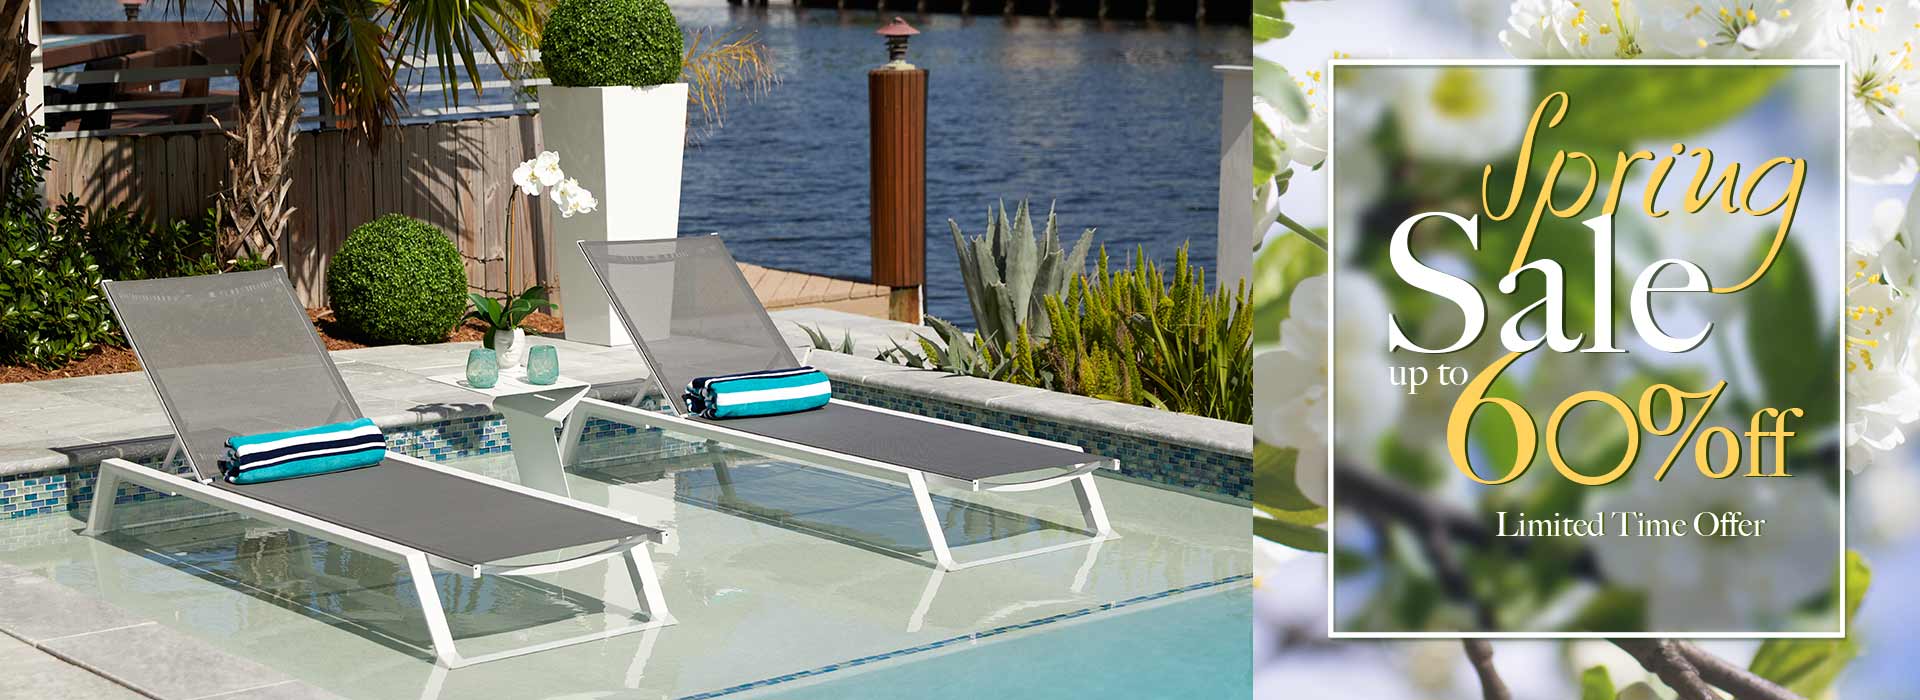 Sale. Ten to sixty percent off selected Indoor and Outdoor Furniture and Accessories.